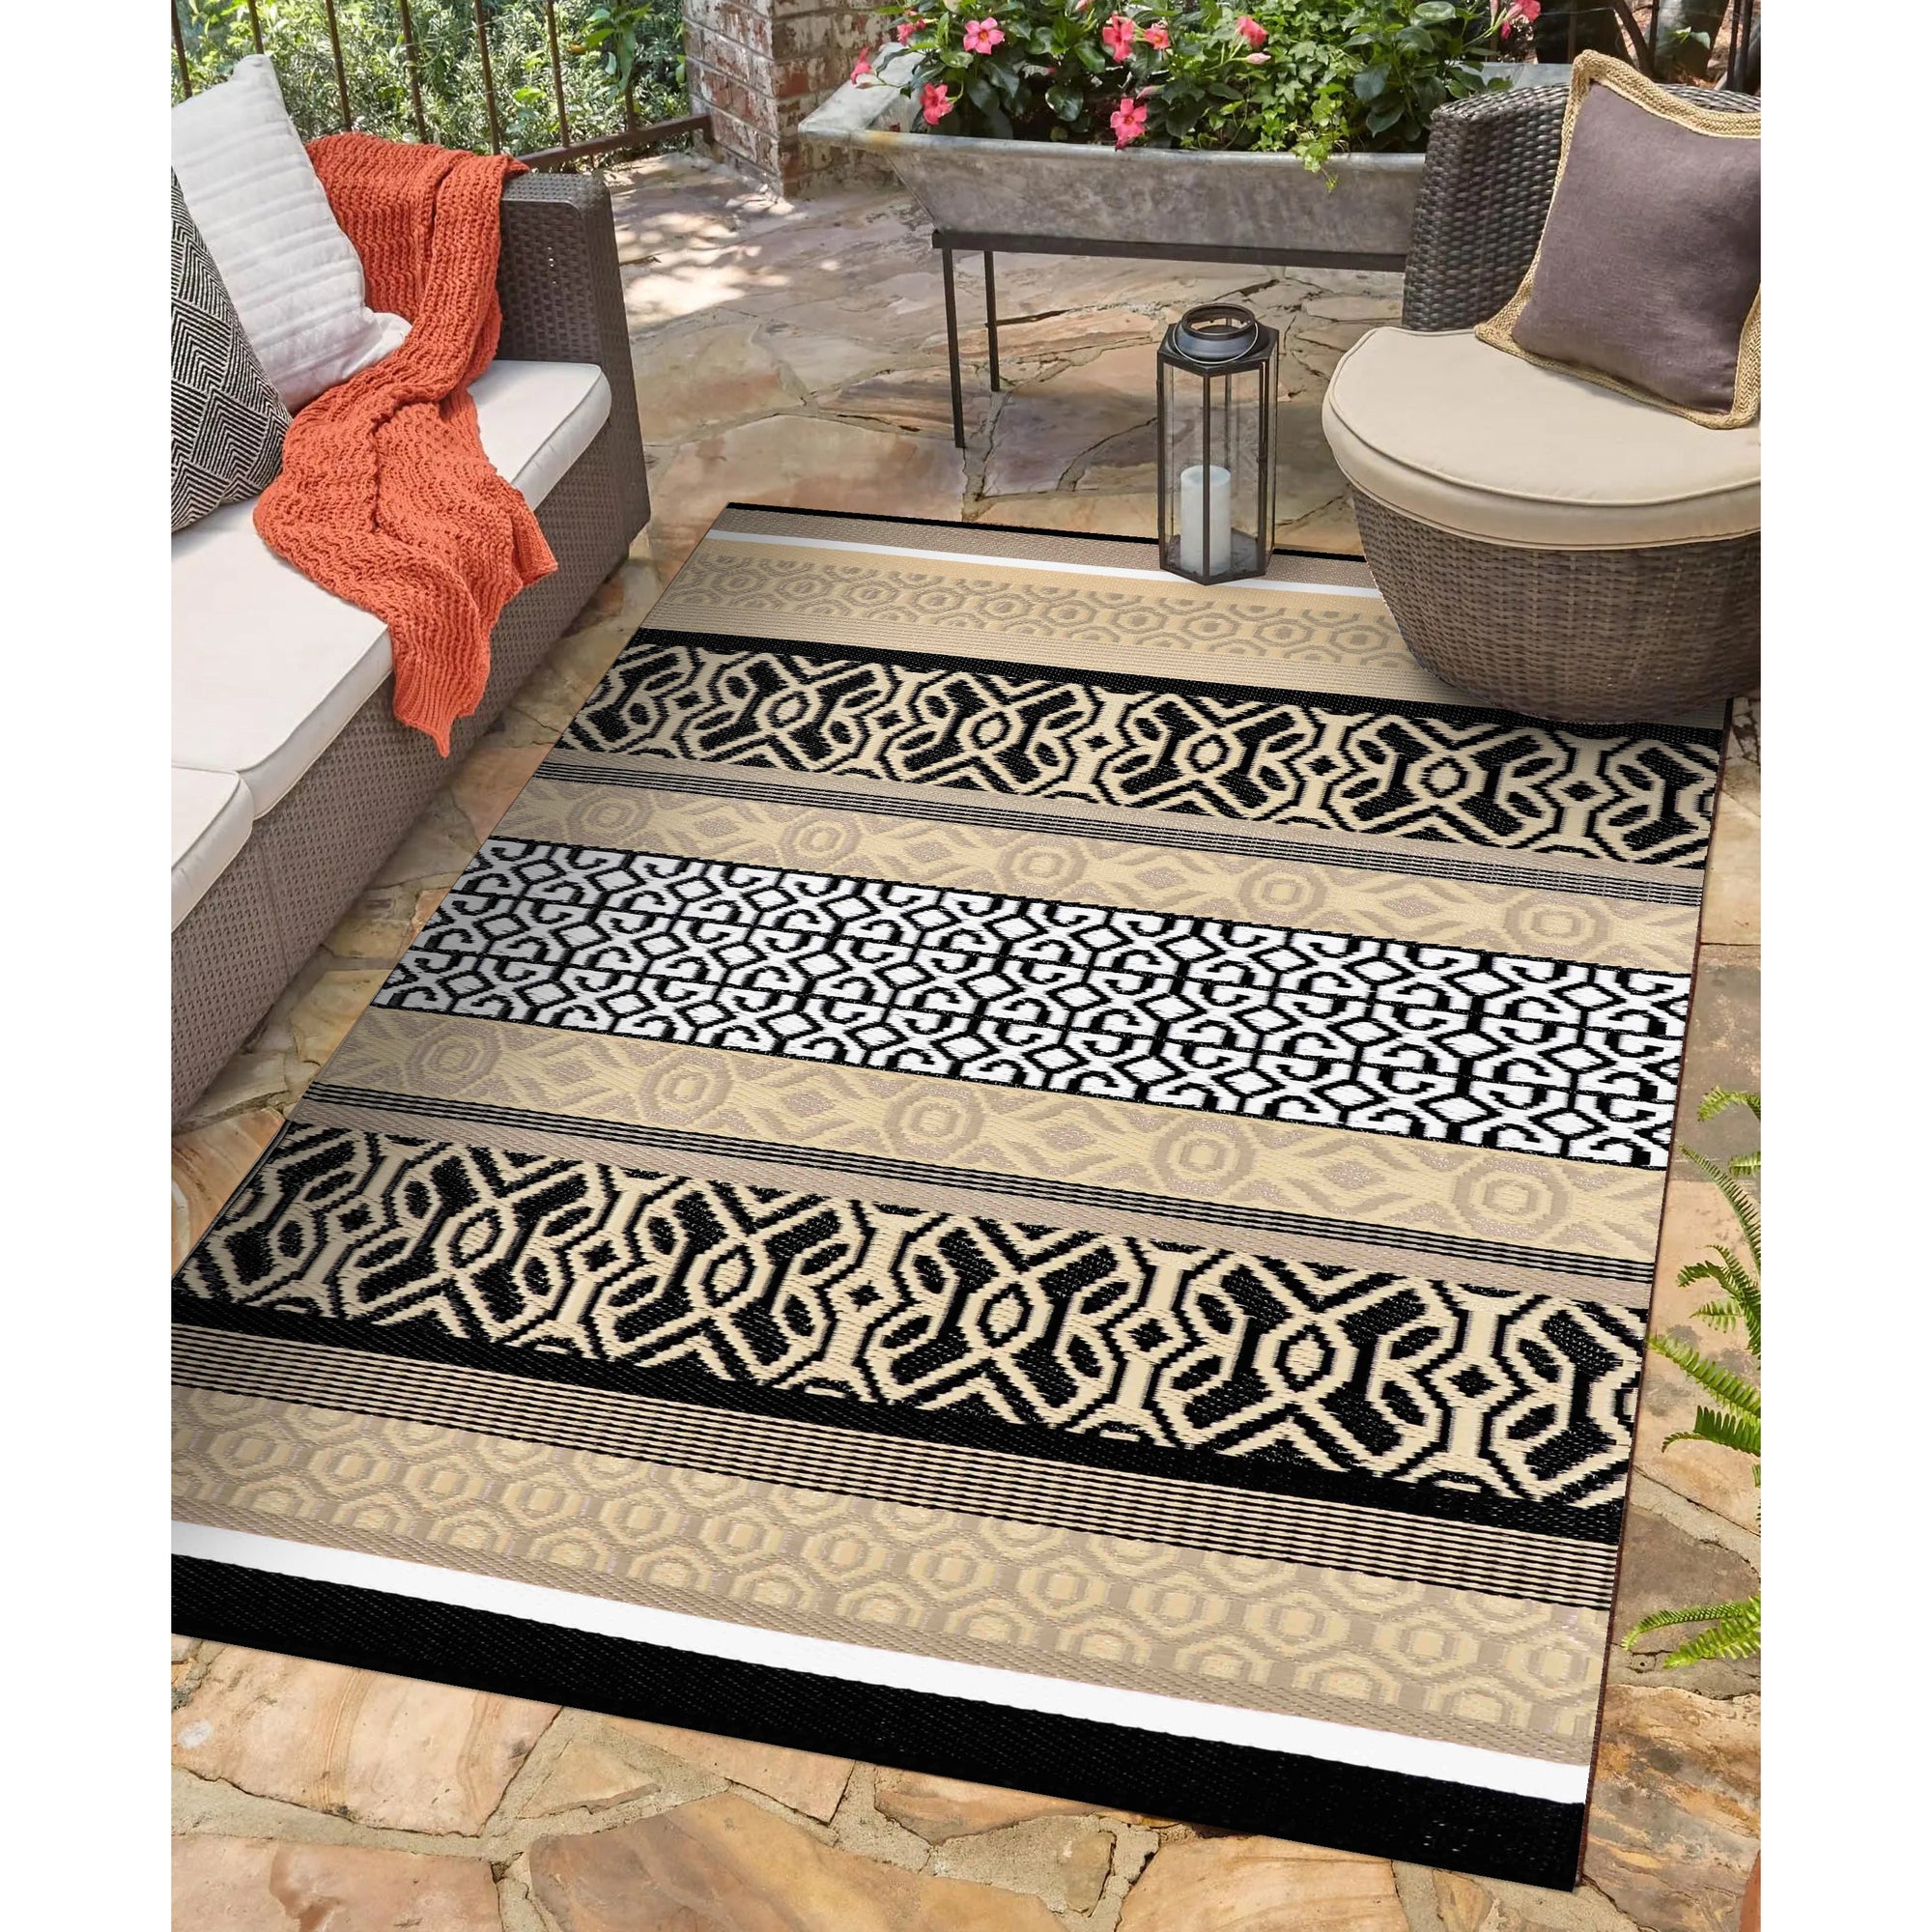 Arcade Outdoor Recycled Plastic Rug (Black/Taupe)